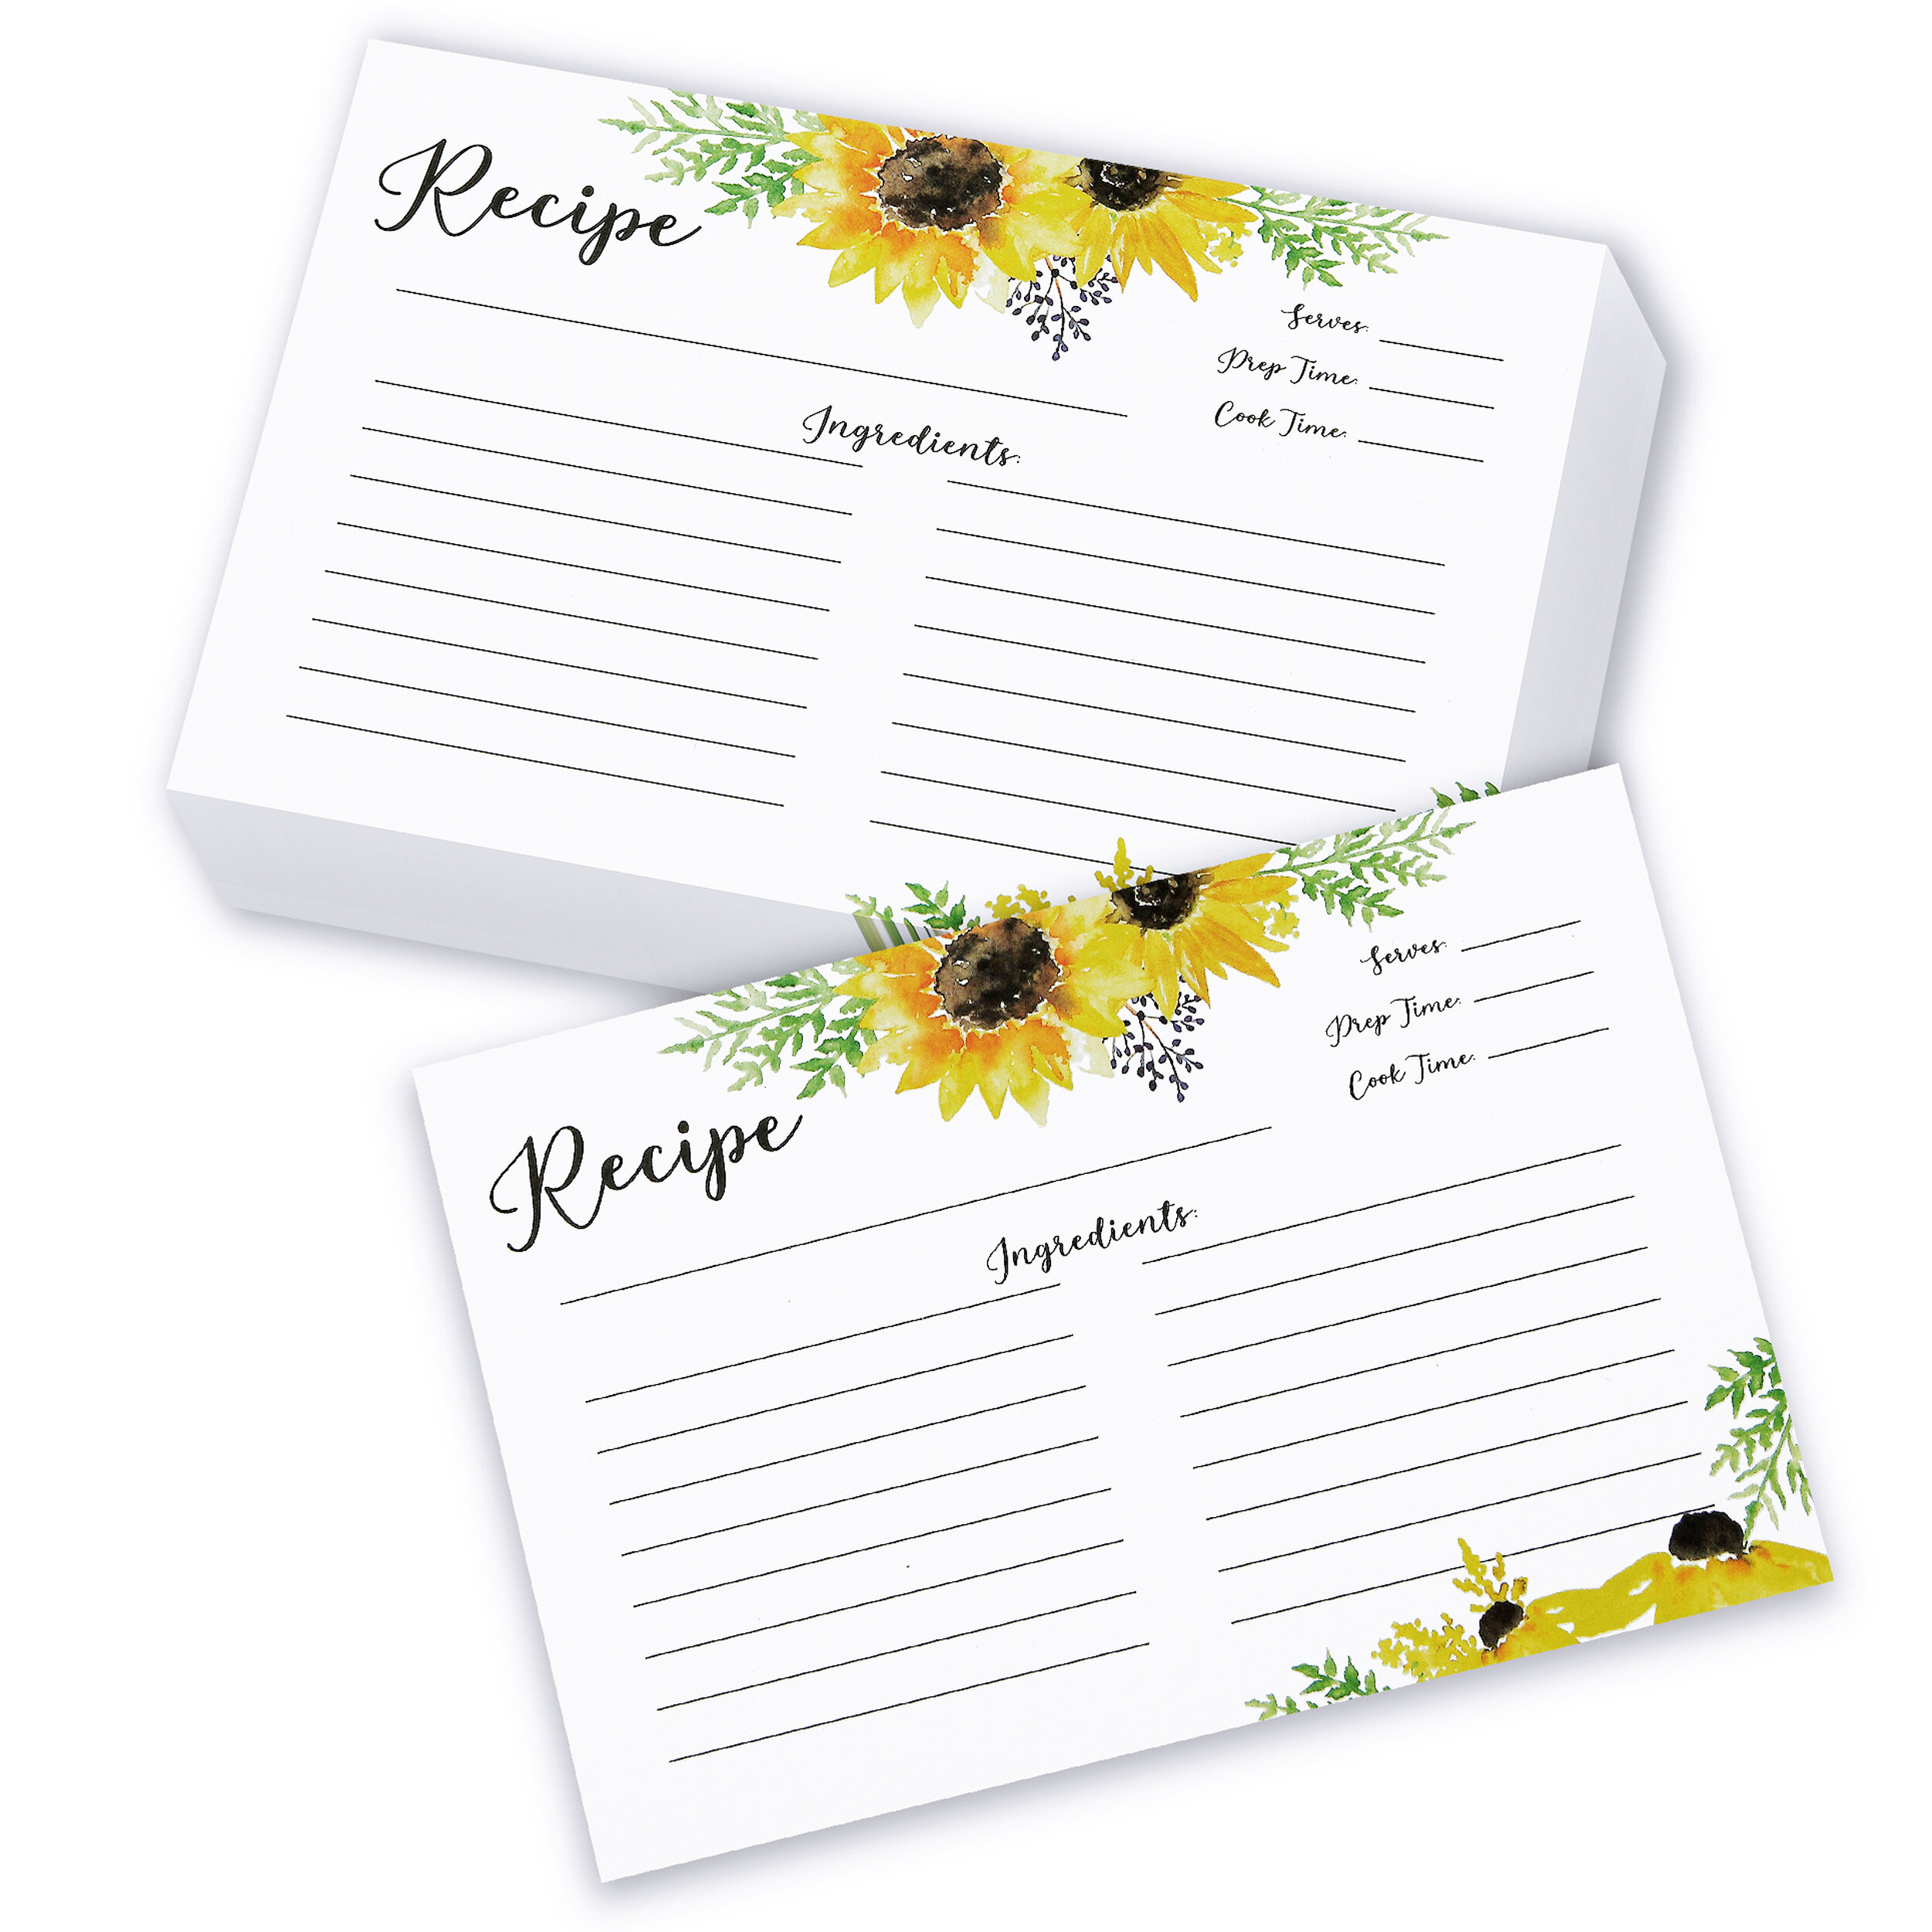 Family MBI 5x7 Inch Additional Recipe Cards 25pk 899855